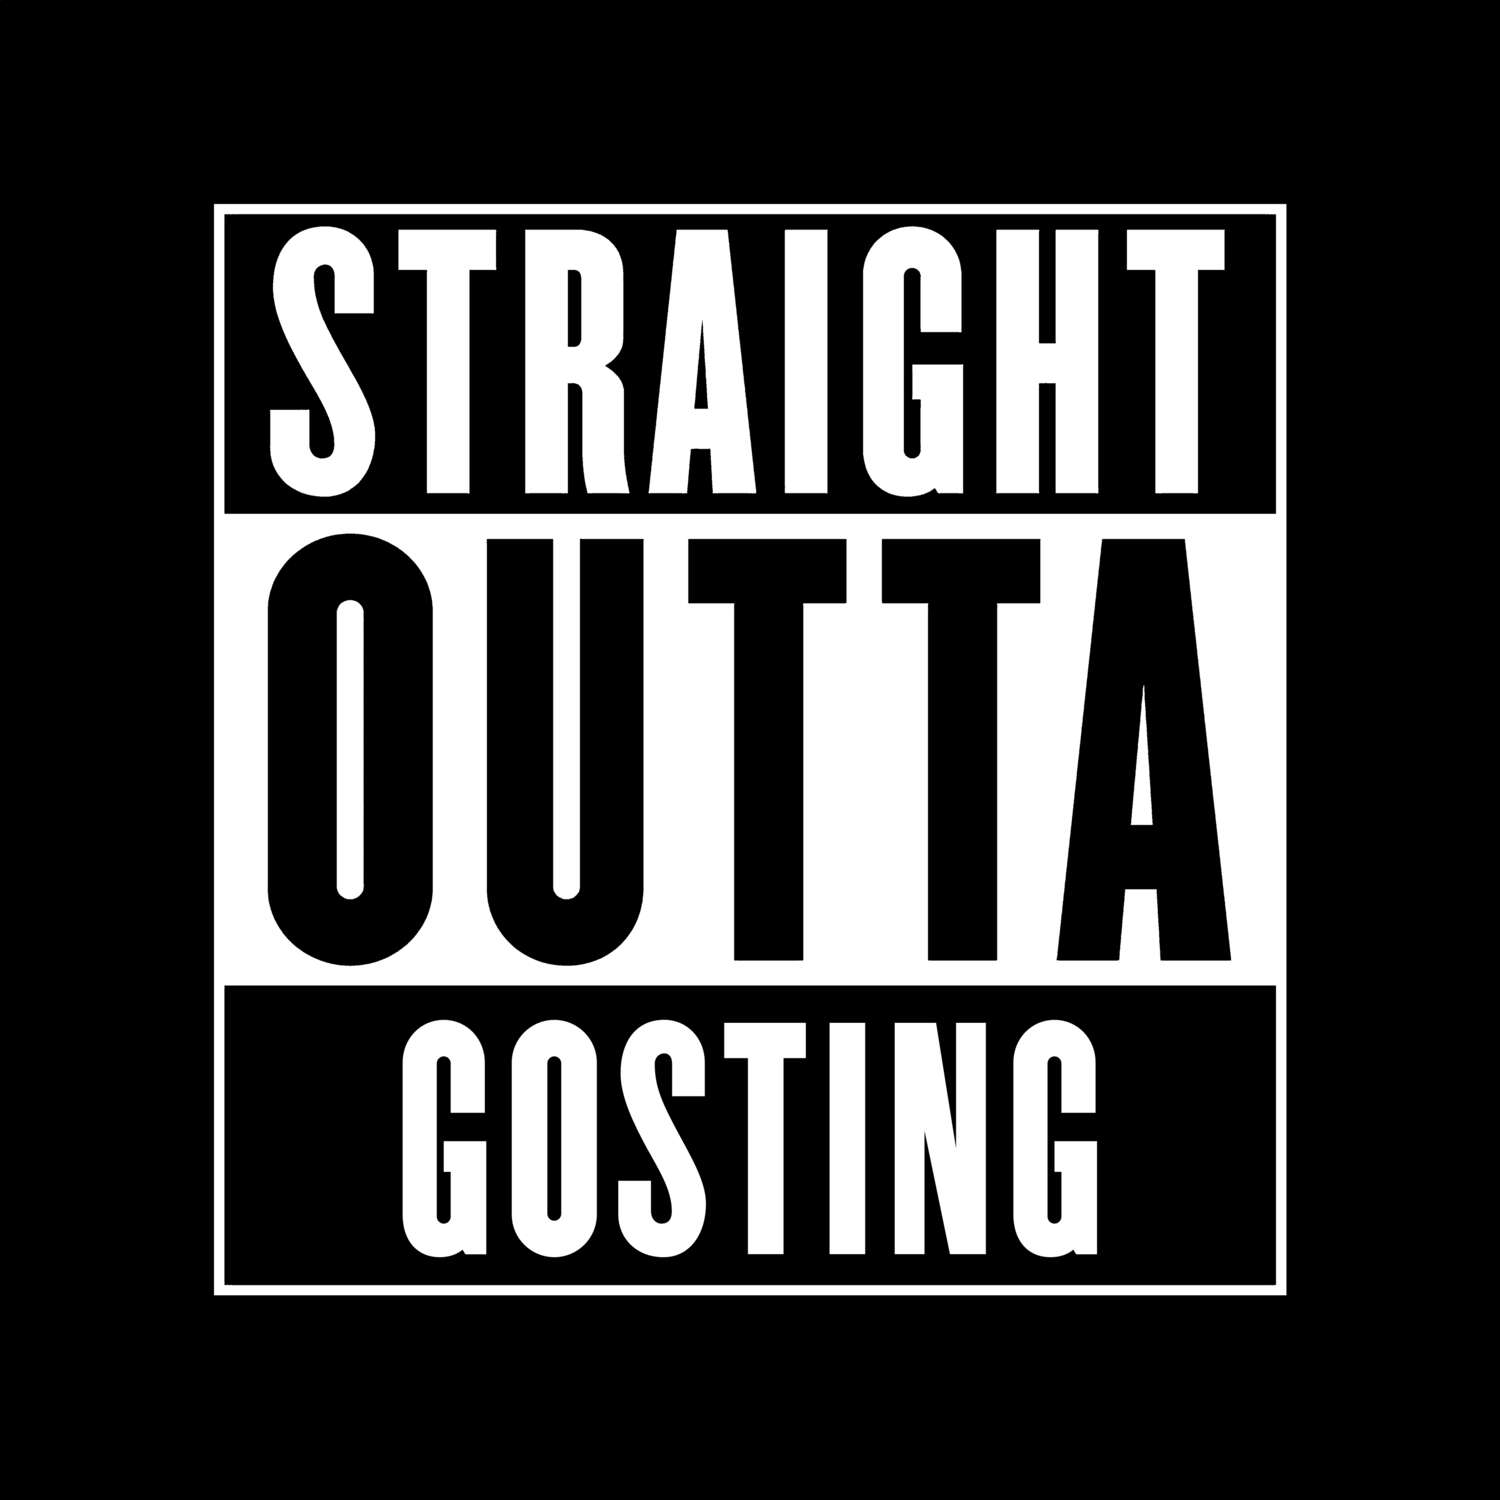 Gosting T-Shirt »Straight Outta«